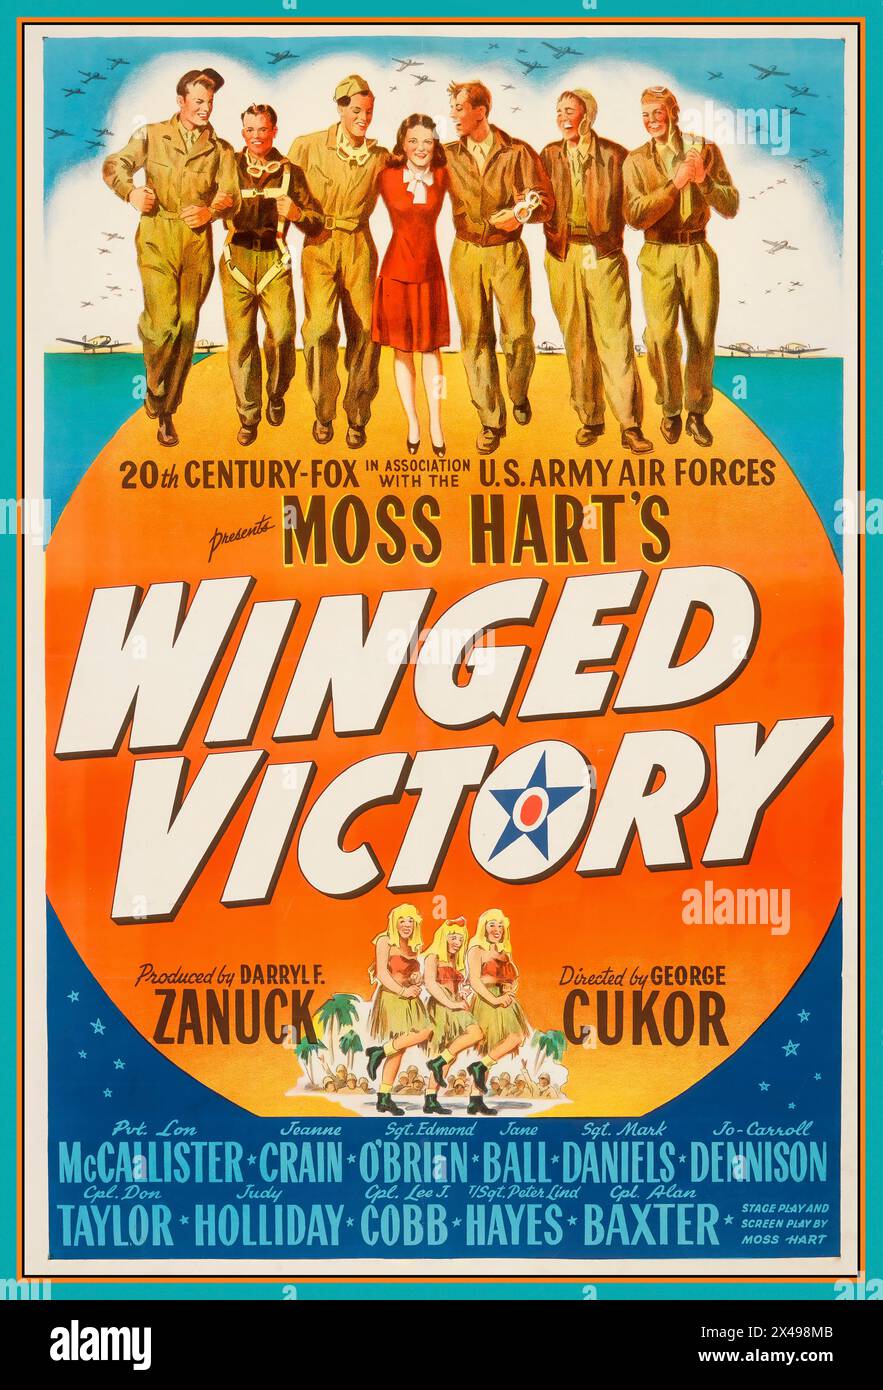 Winged Victory is a 1943 movie by Moss Hart, created and produced by the U.S. Army Air Forces during World War II as a morale booster and as a fundraiser for the Army Emergency Relief Fund. Hart also adapted the play for a 1944 motion picture directed by George Cukor. WW2 World War II USA Stock Photo